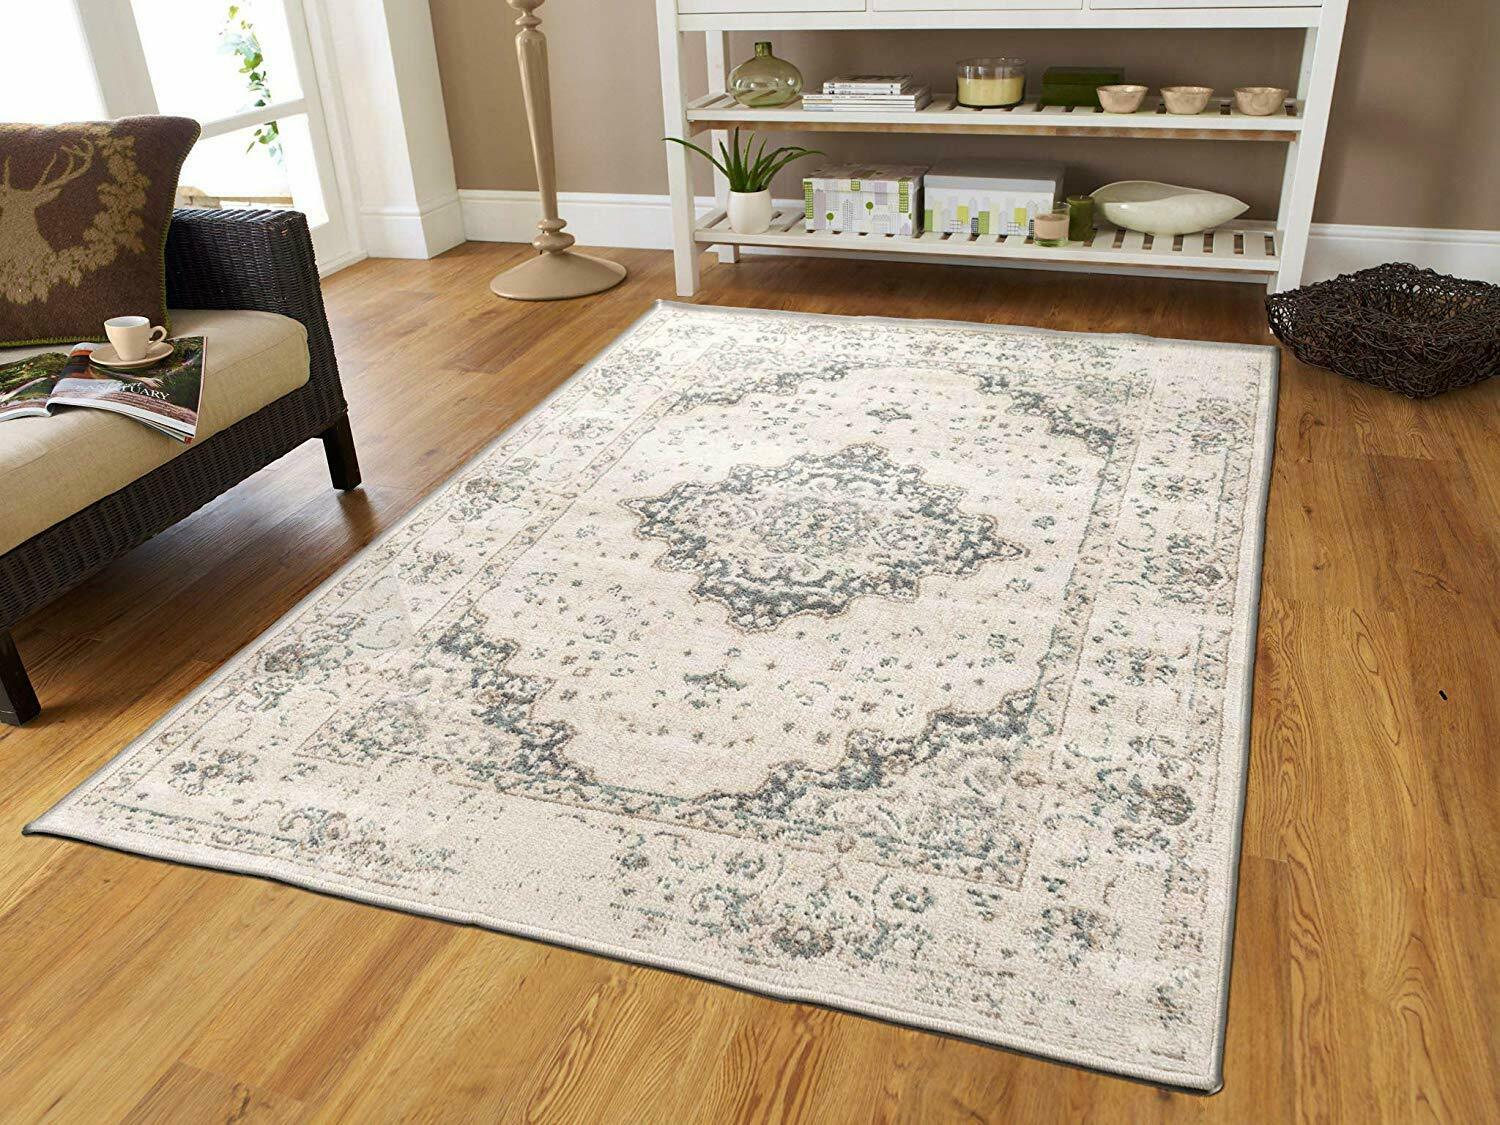 Traditional Distressed Area Rug 8x10 Large Rugs For Living Room 5x8 Gray Ivory